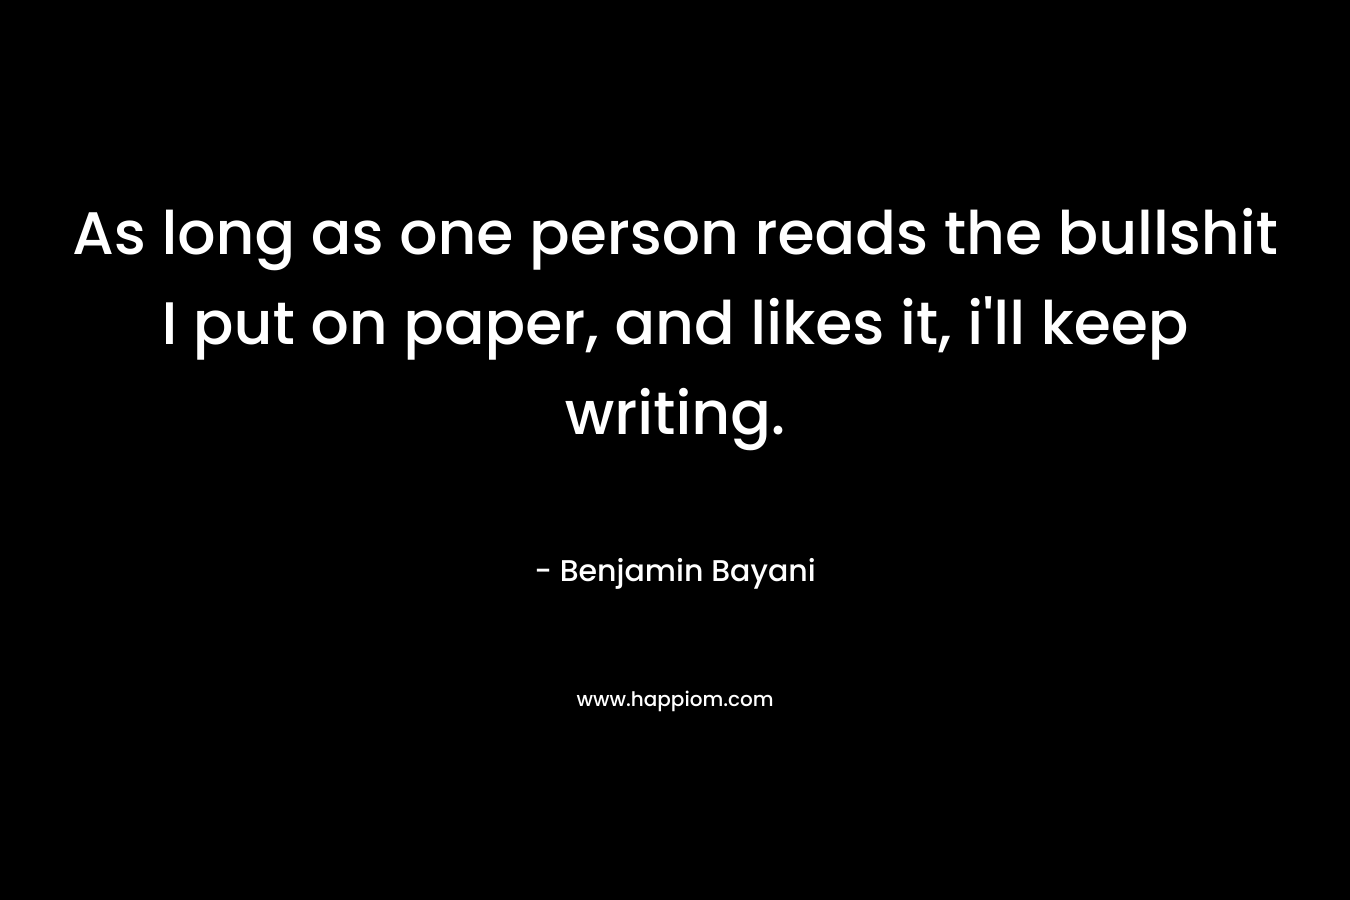 As long as one person reads the bullshit I put on paper, and likes it, i’ll keep writing. – Benjamin Bayani